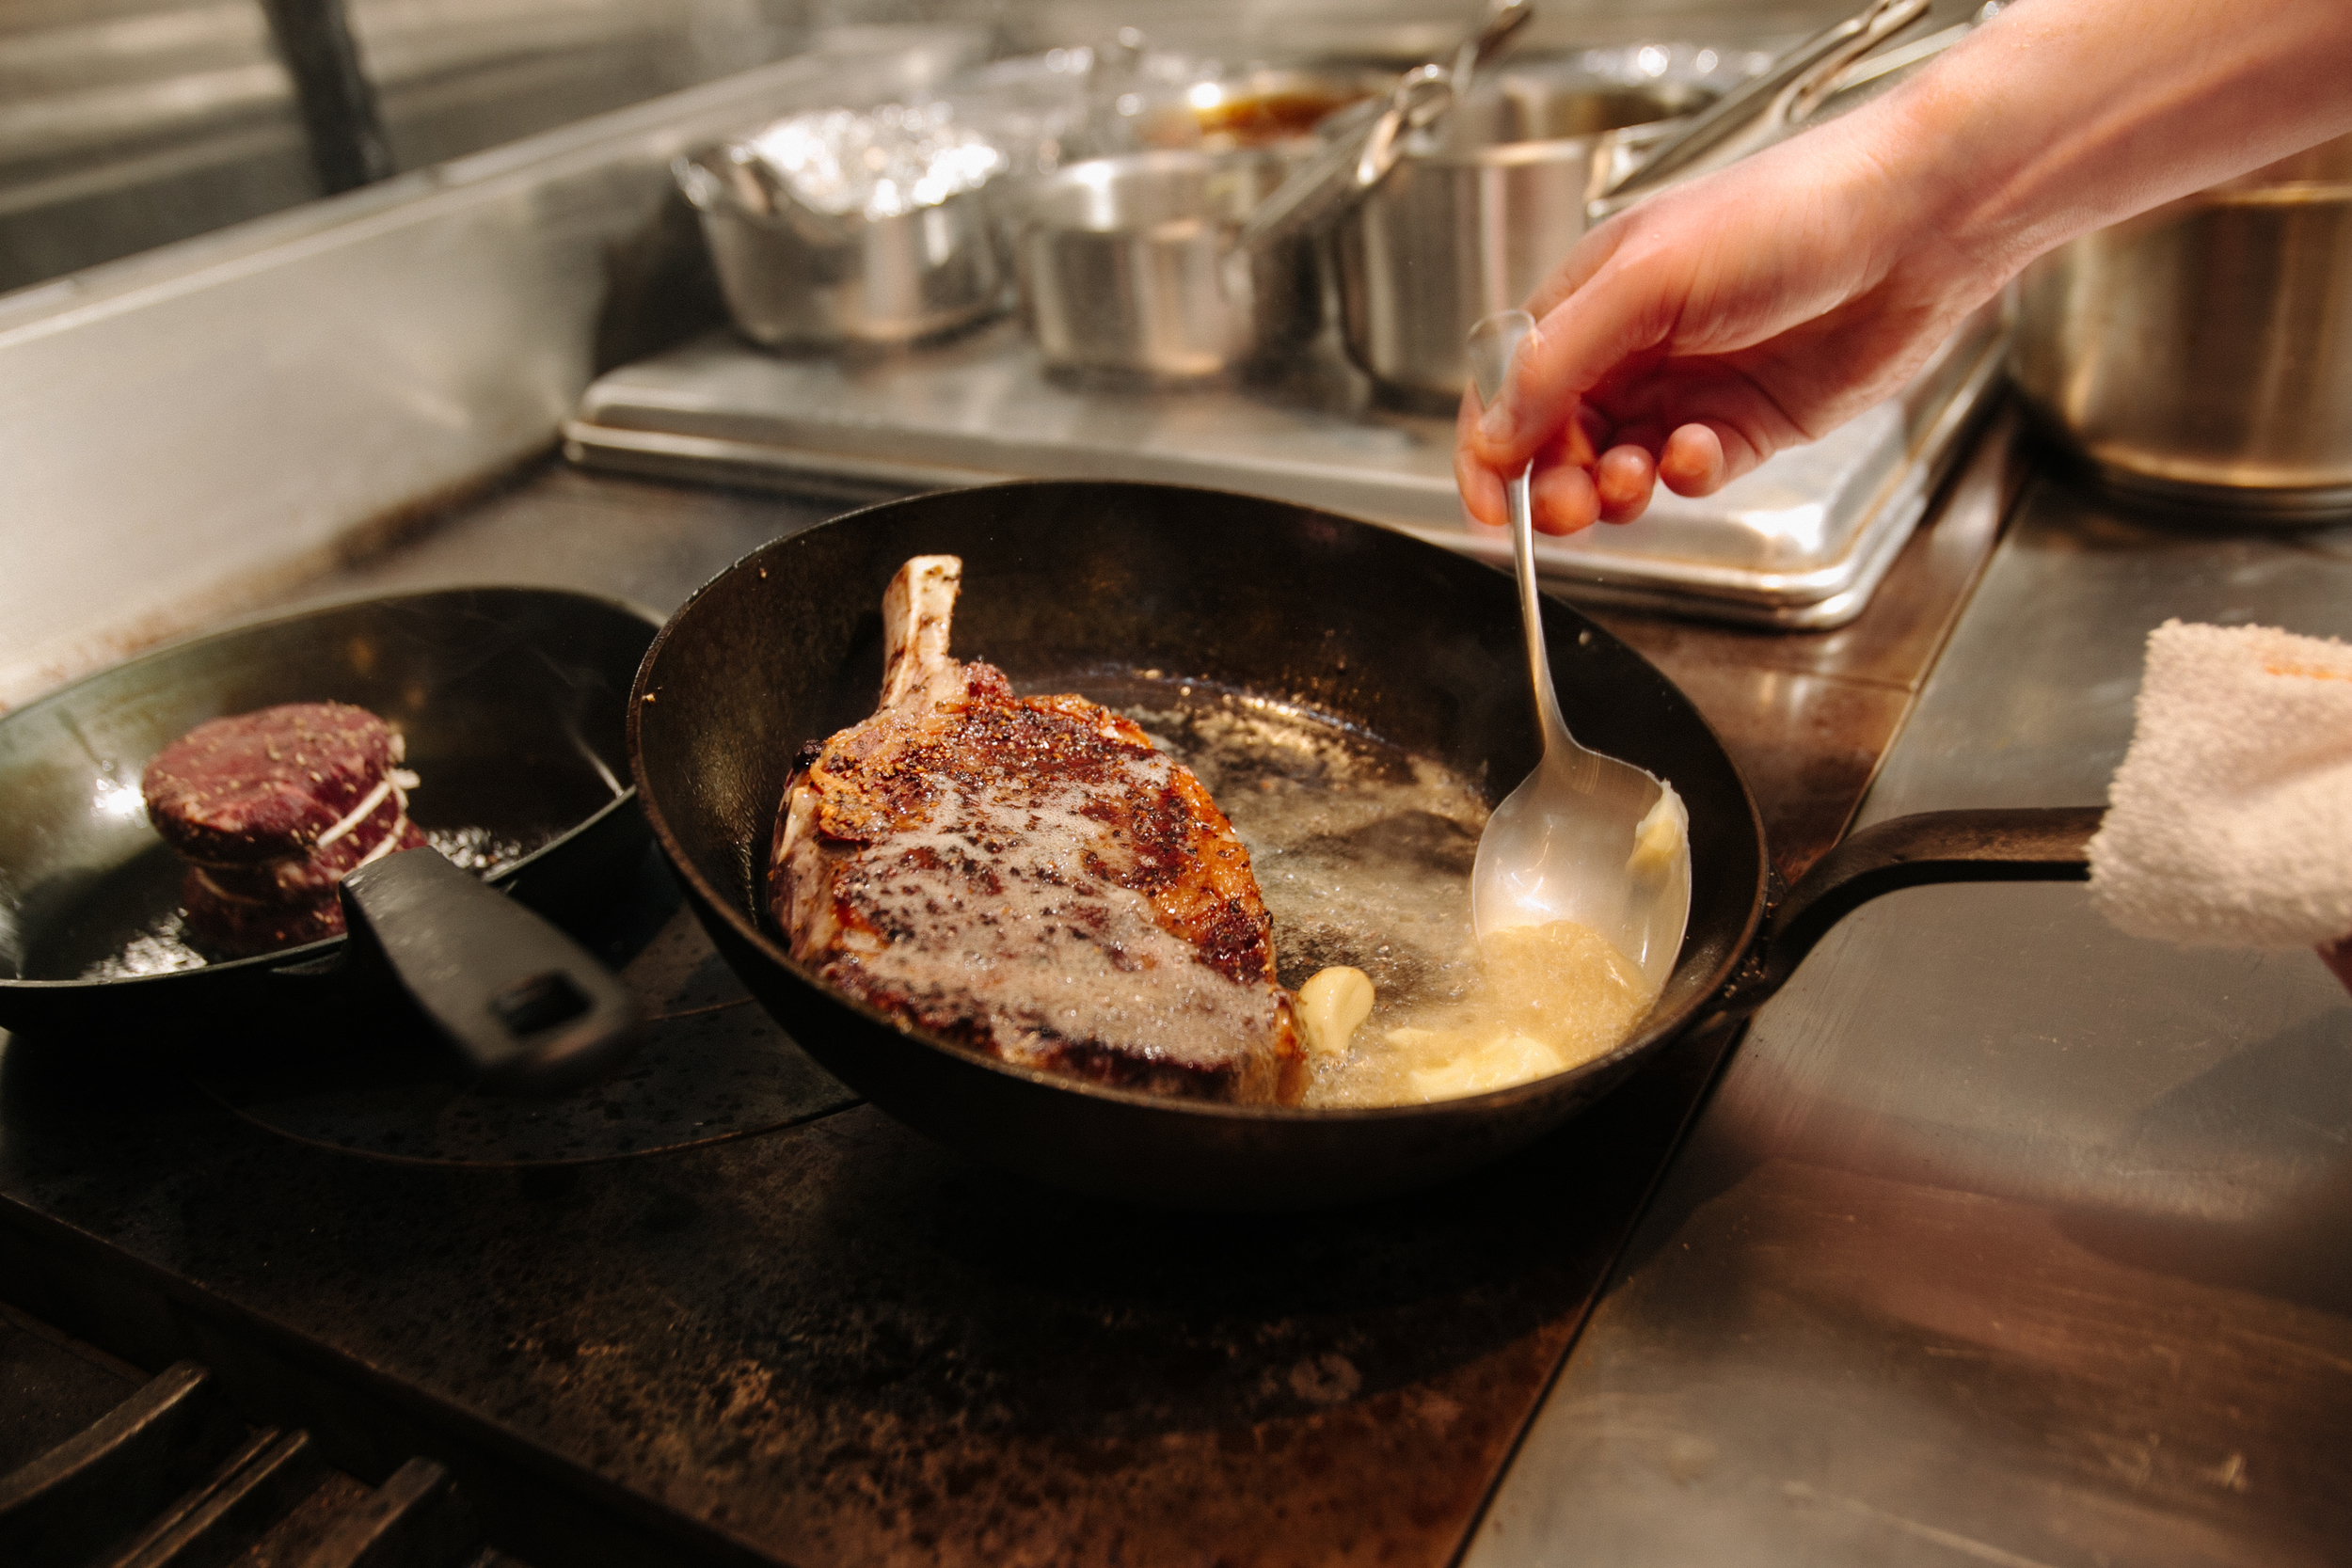 A chef bastes a steak in butter on a stove.